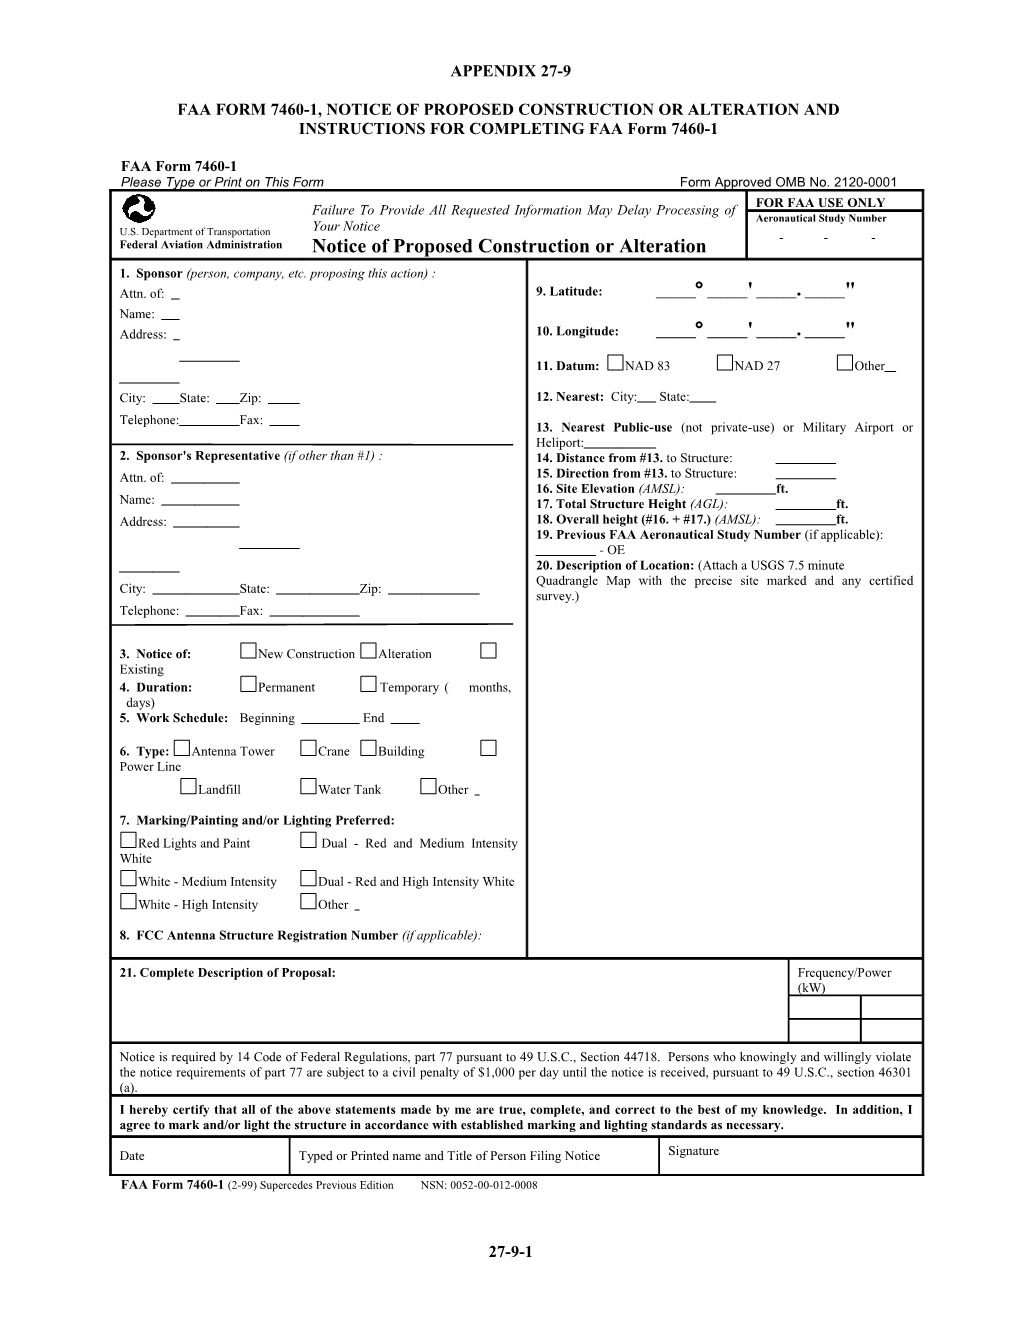 FAA Form 7460-1, Notice of Proposed Construction Or Alteration And